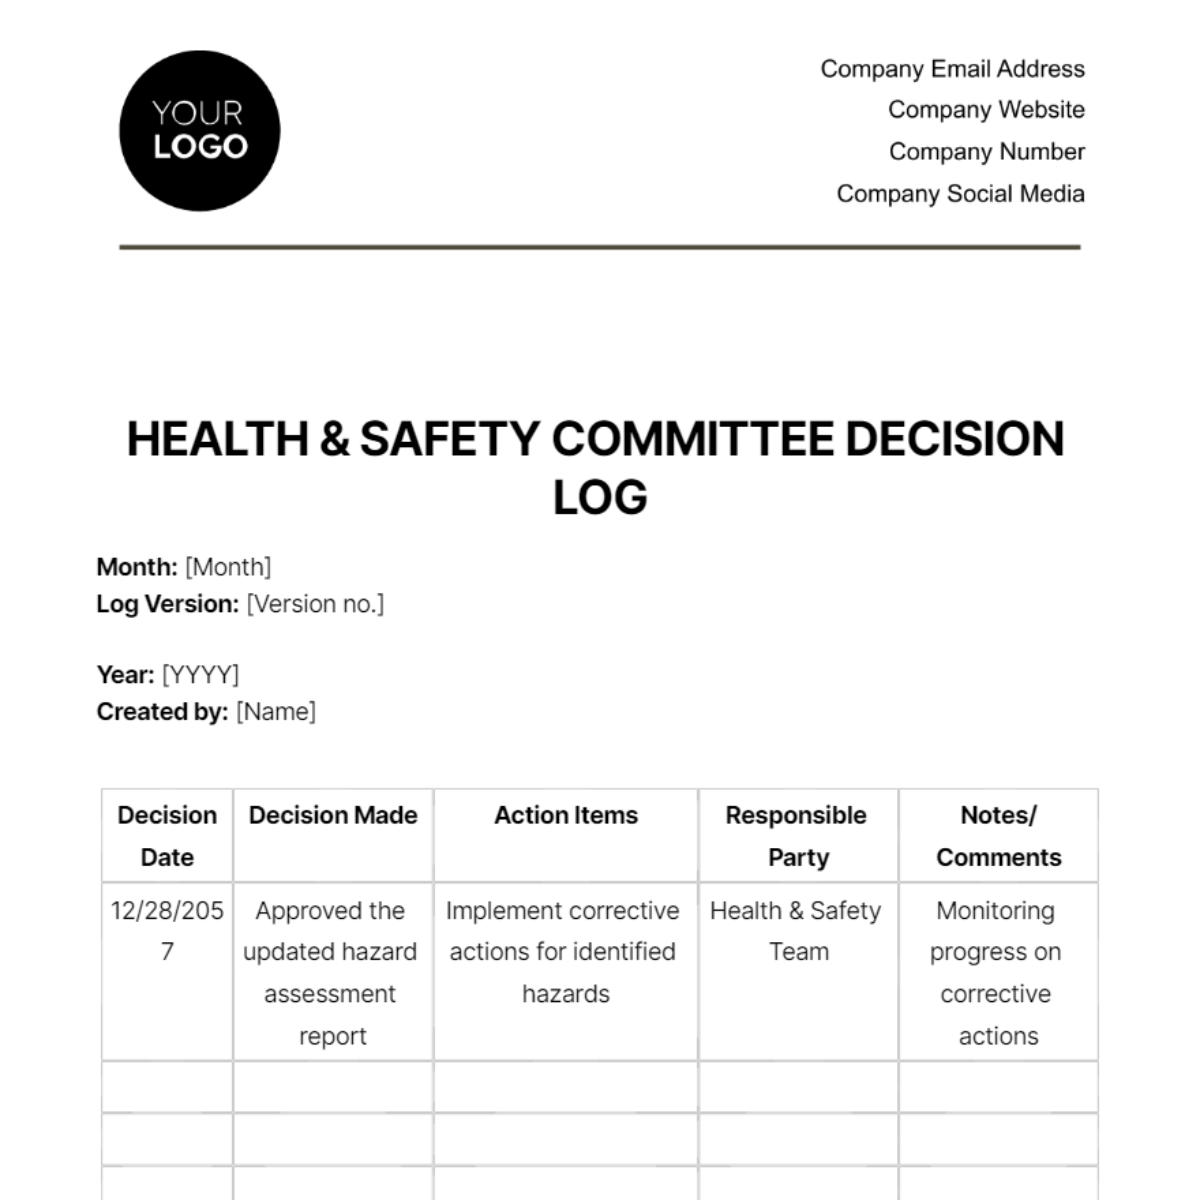 Health & Safety Committee Decision Log Template